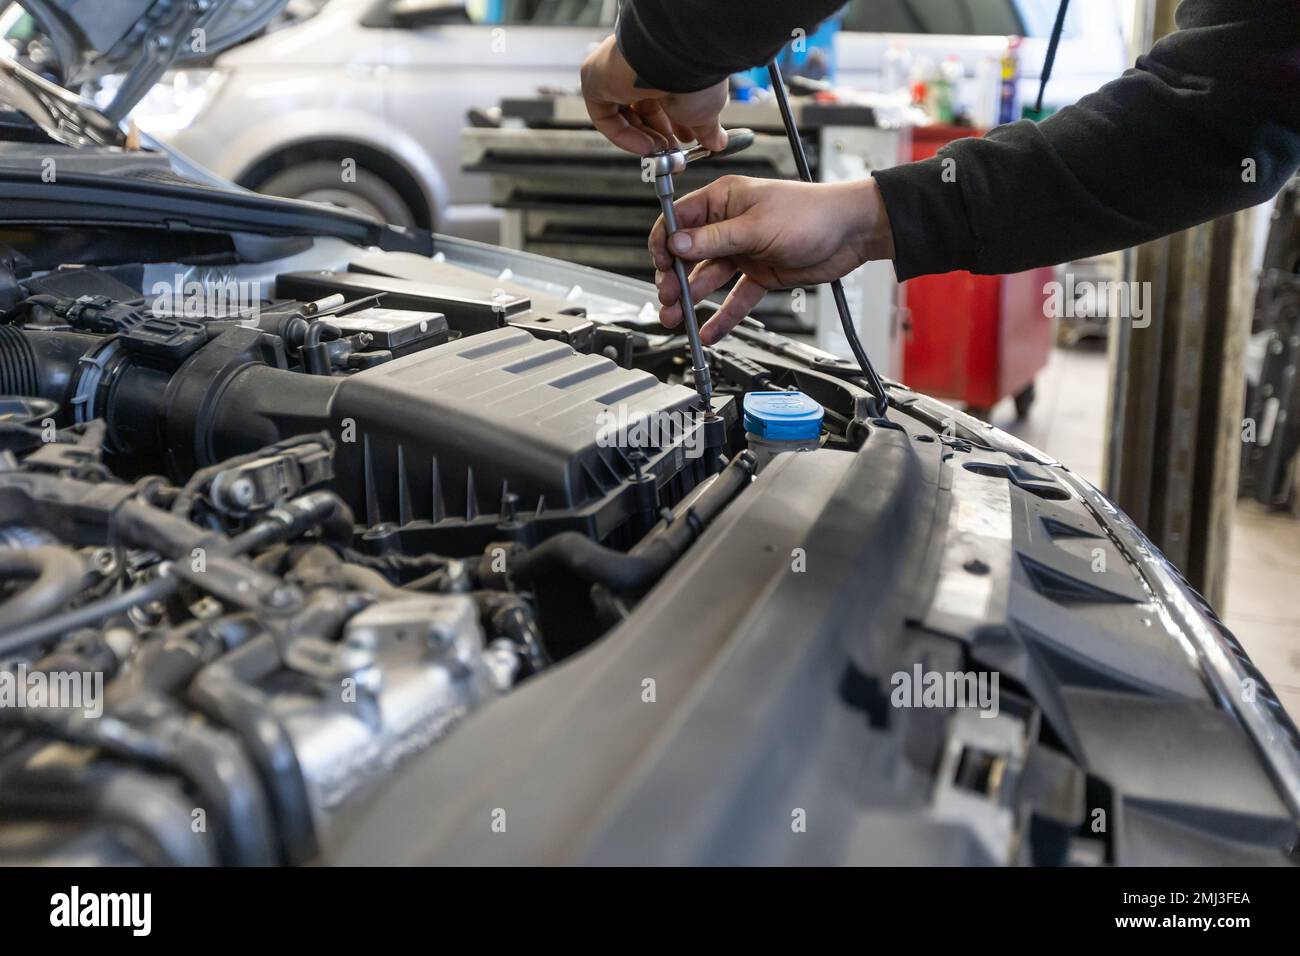 Professional car servis man changing the air filter by the car engine, car service concept Stock Photo